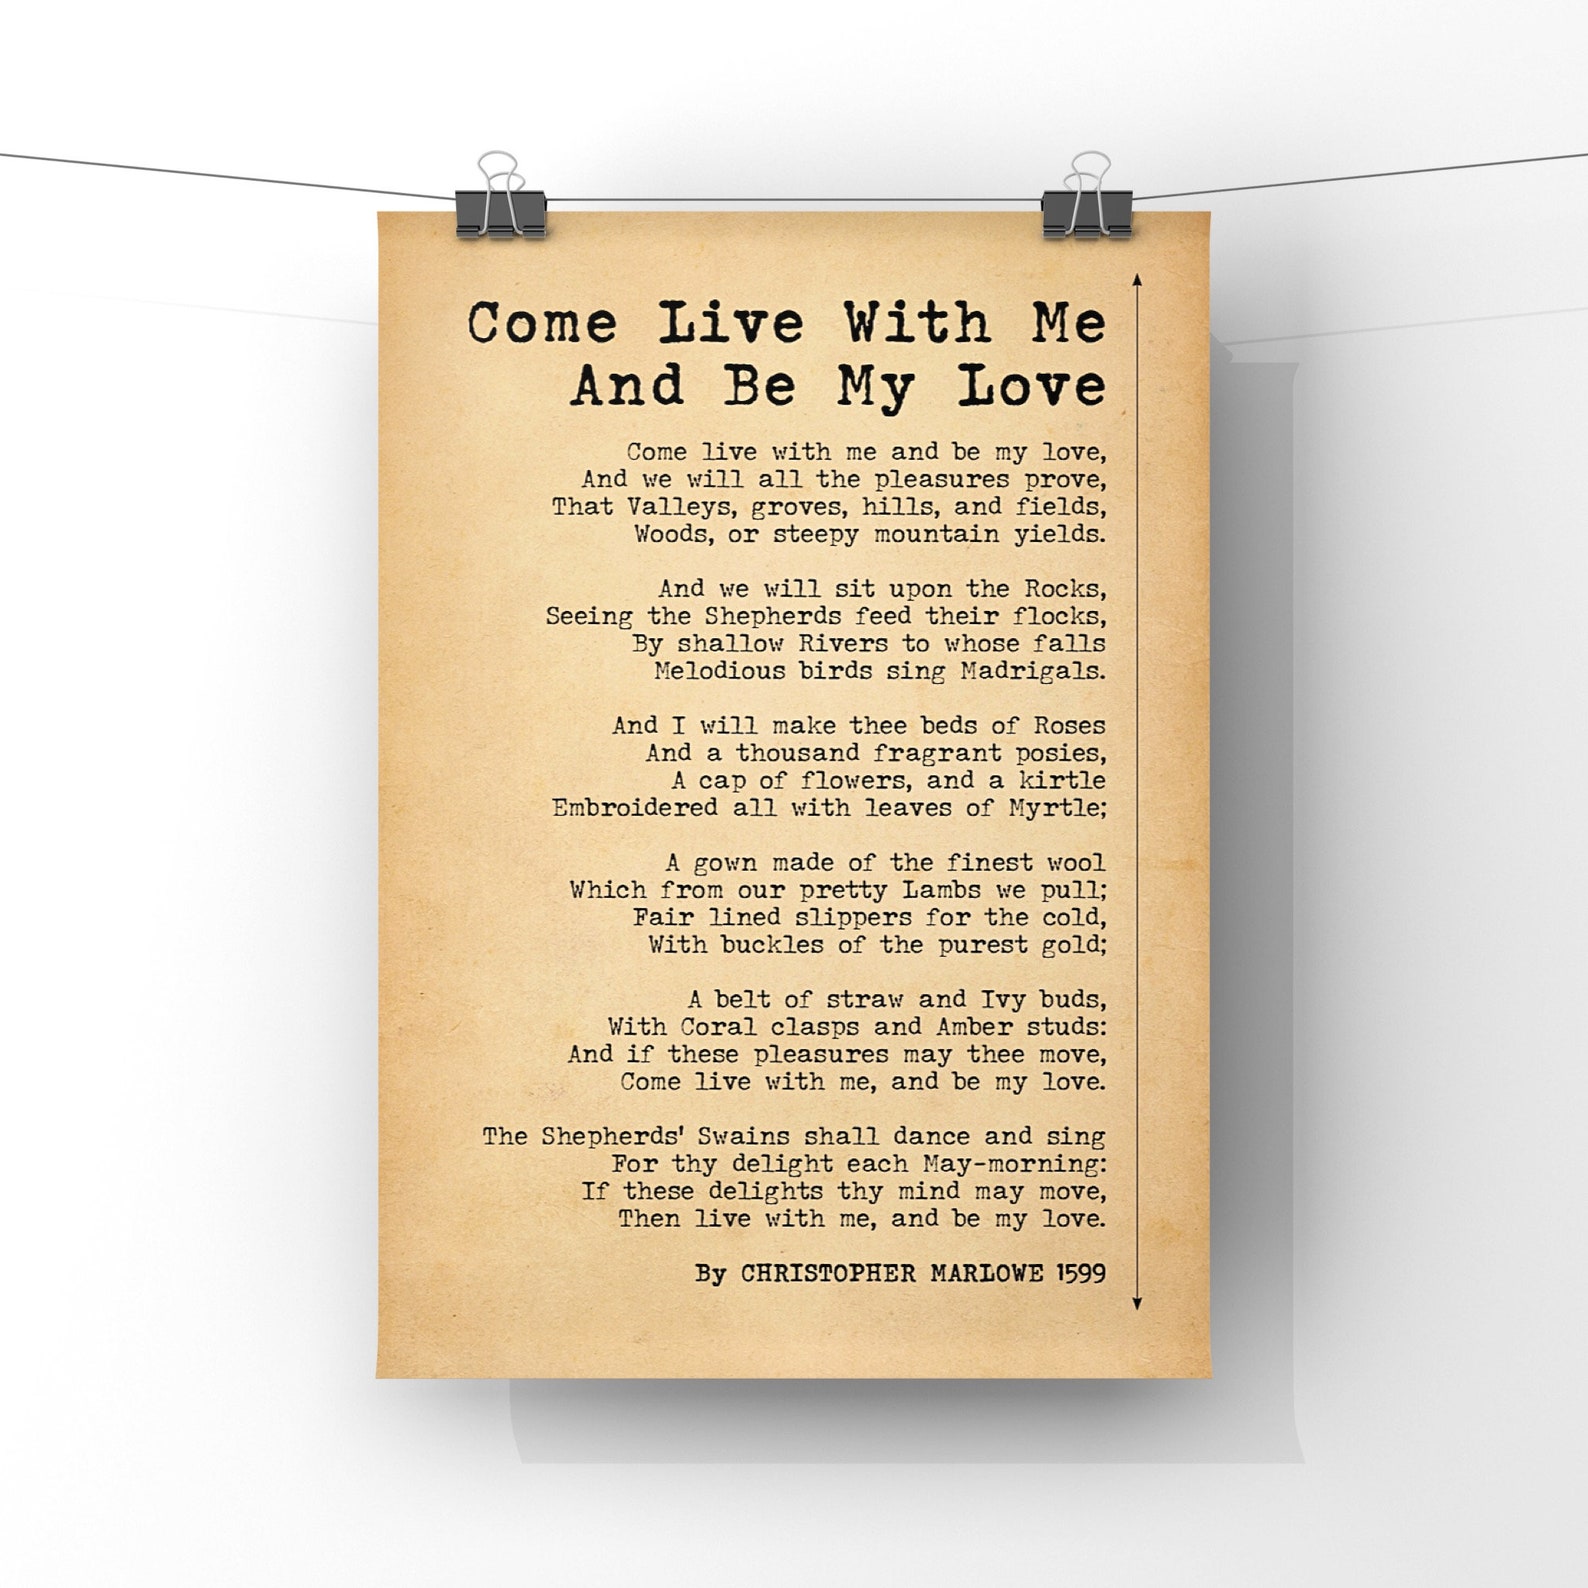 Come Live With Me and Be My Love Poem by Christopher Marlowe - Etsy